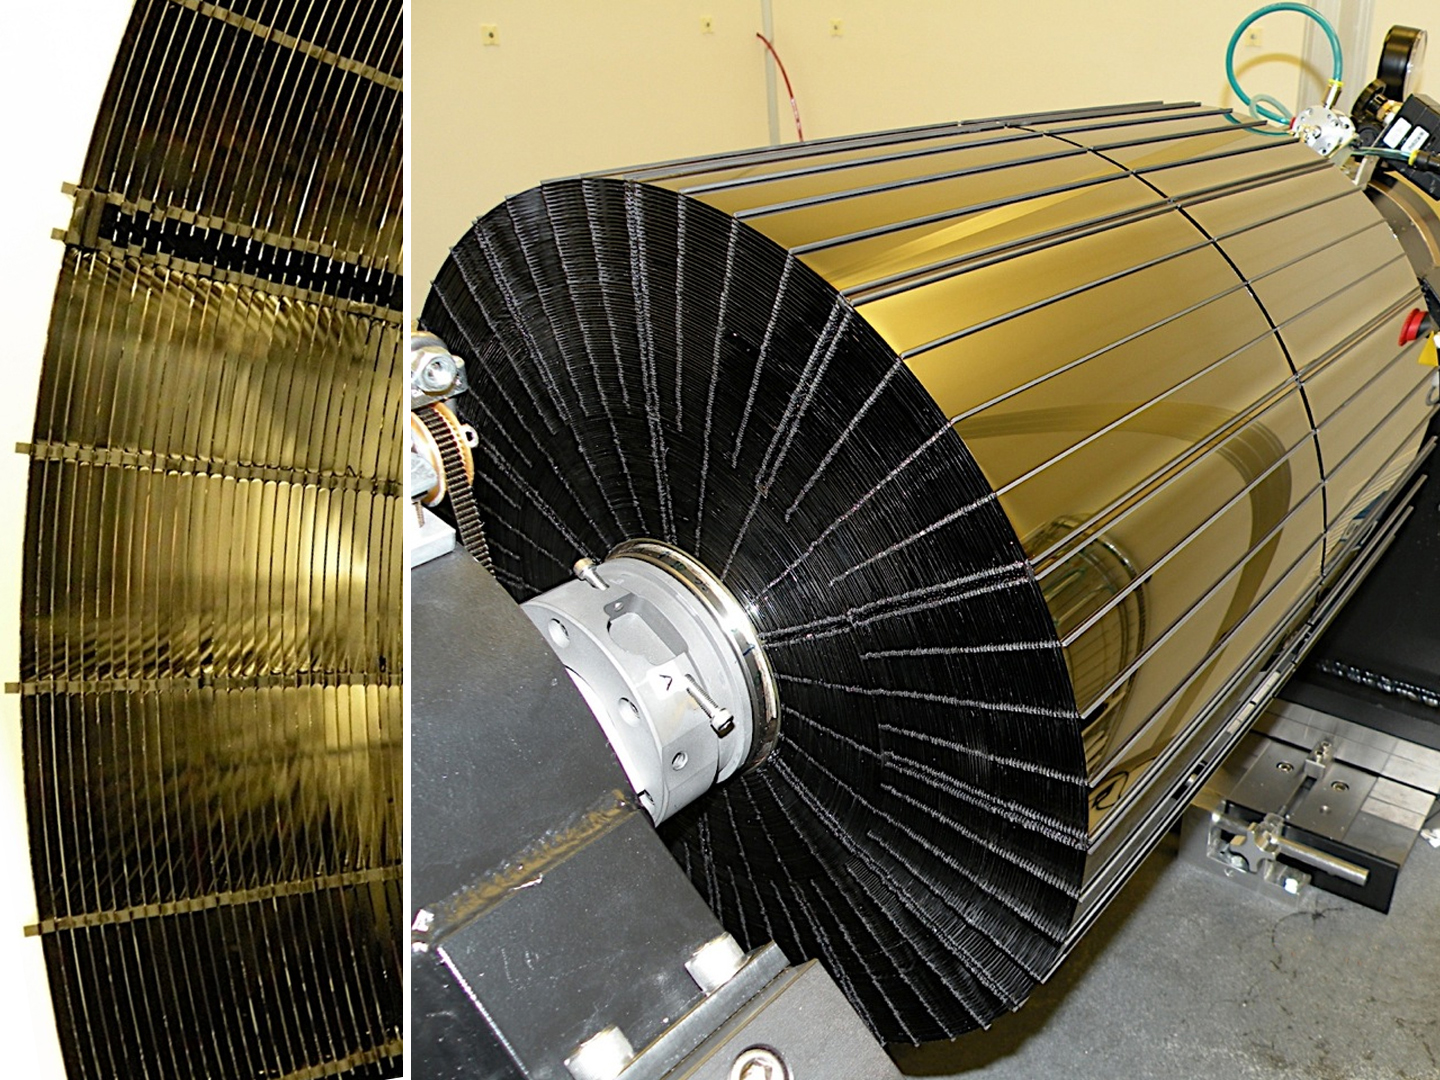 Different views of one of two optic units onboard NuSTAR, each consisting of 133 nested cylindrical mirror shells as thin as a fingernail. The mirrors are arranged in this way in order to focus as much X-ray light as possible.